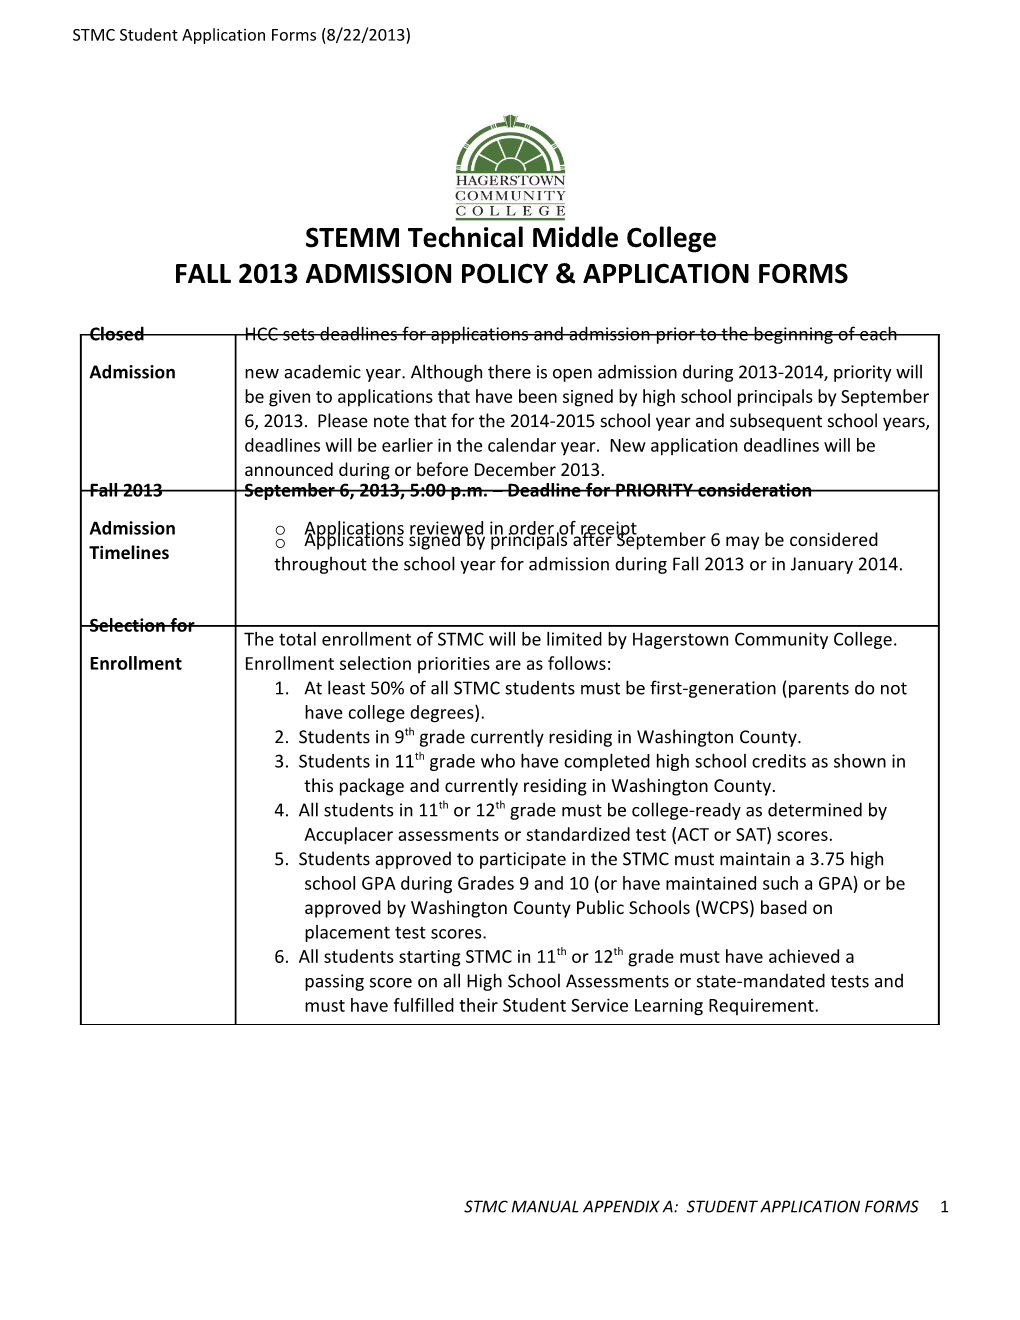 STMC Student Application Forms (8/22/2013)